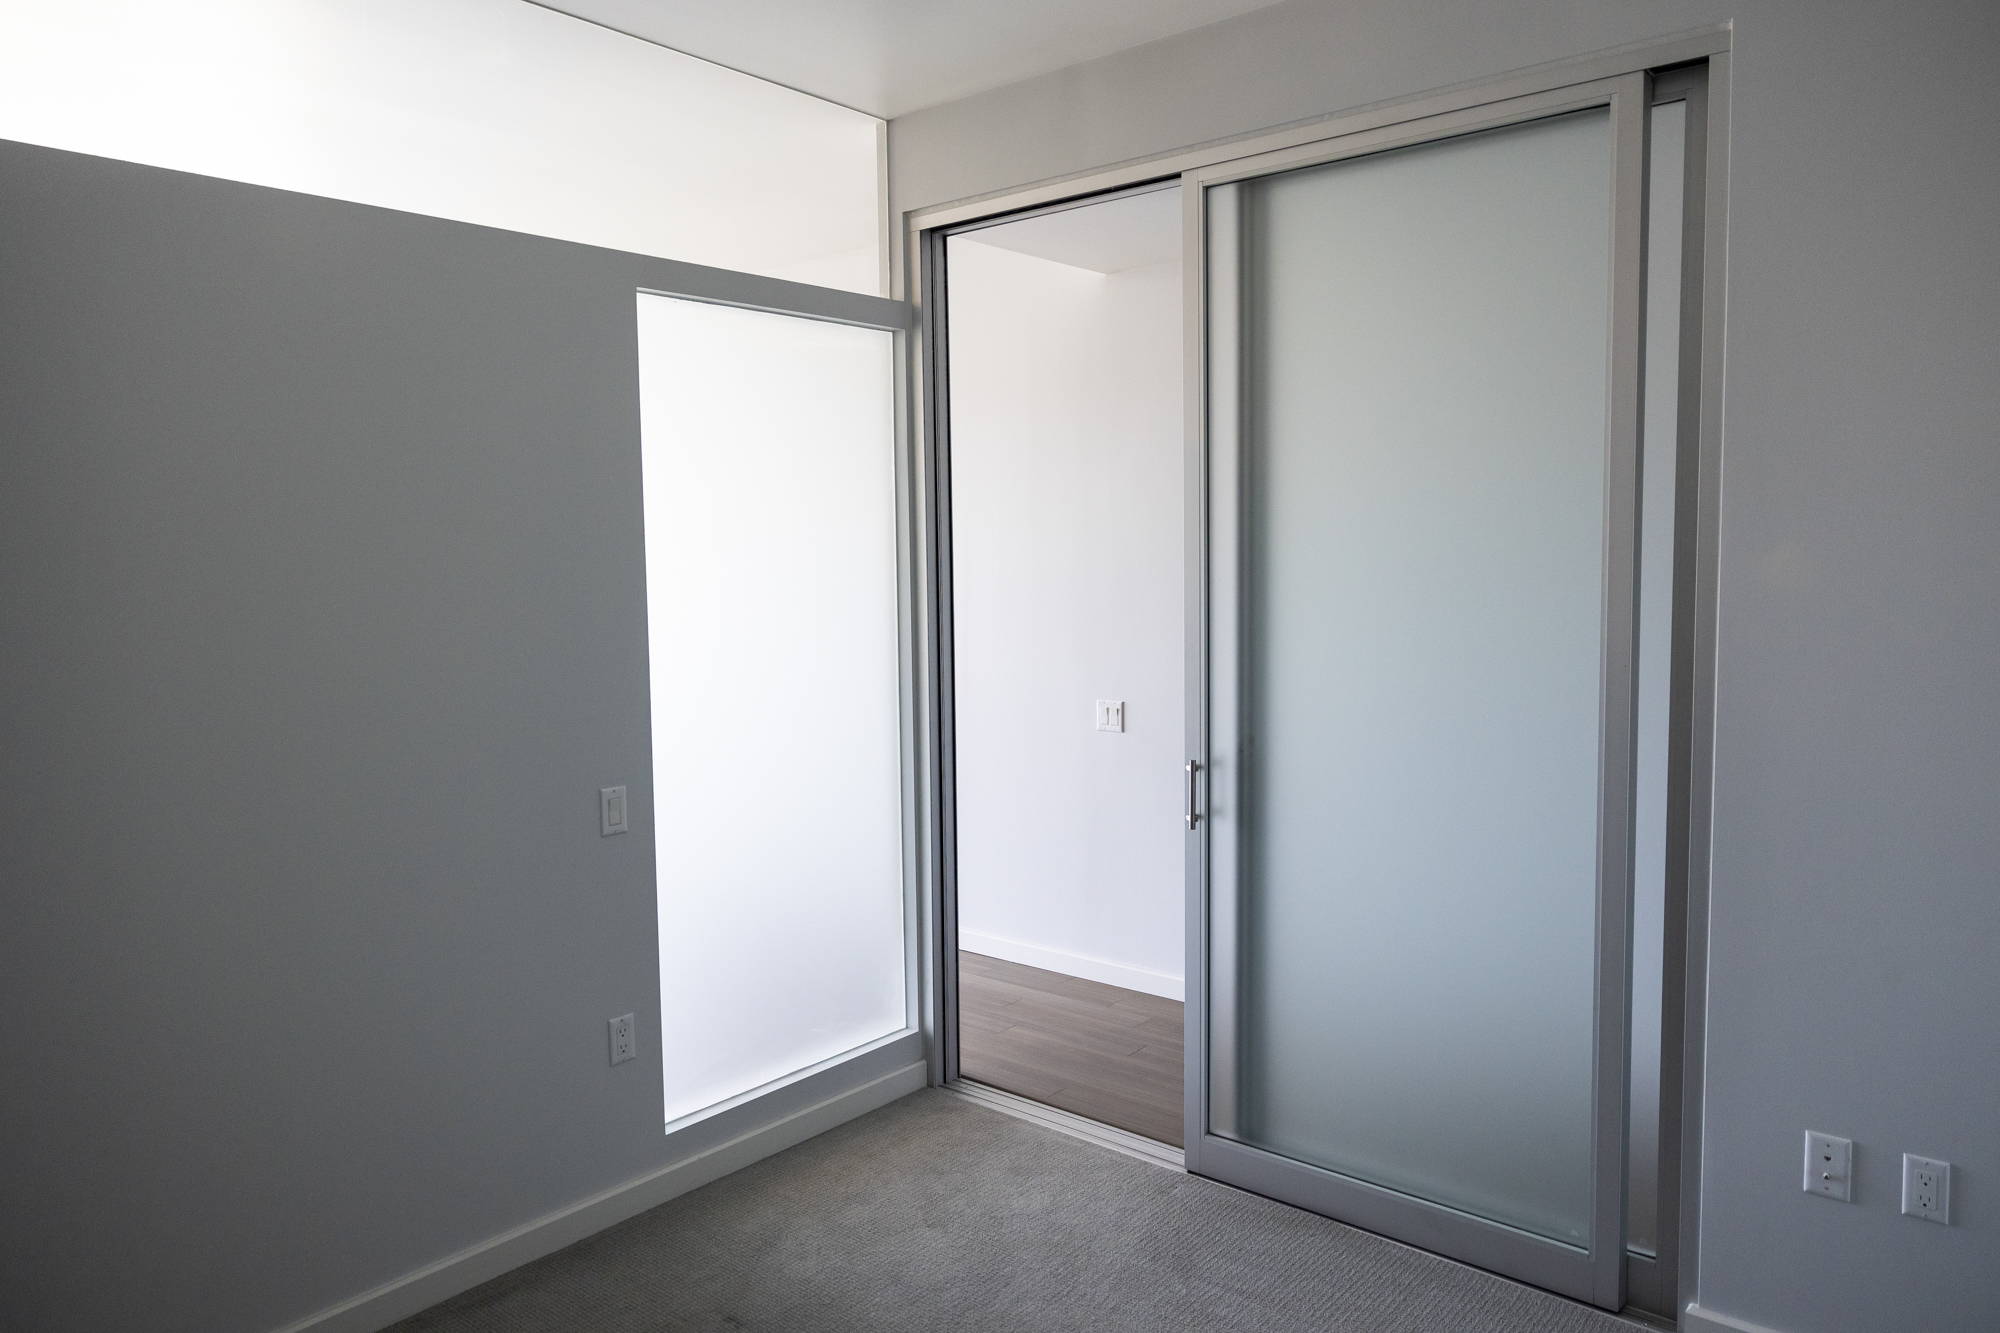 A large empty room with a glass sliding door and glass panels in one wall.